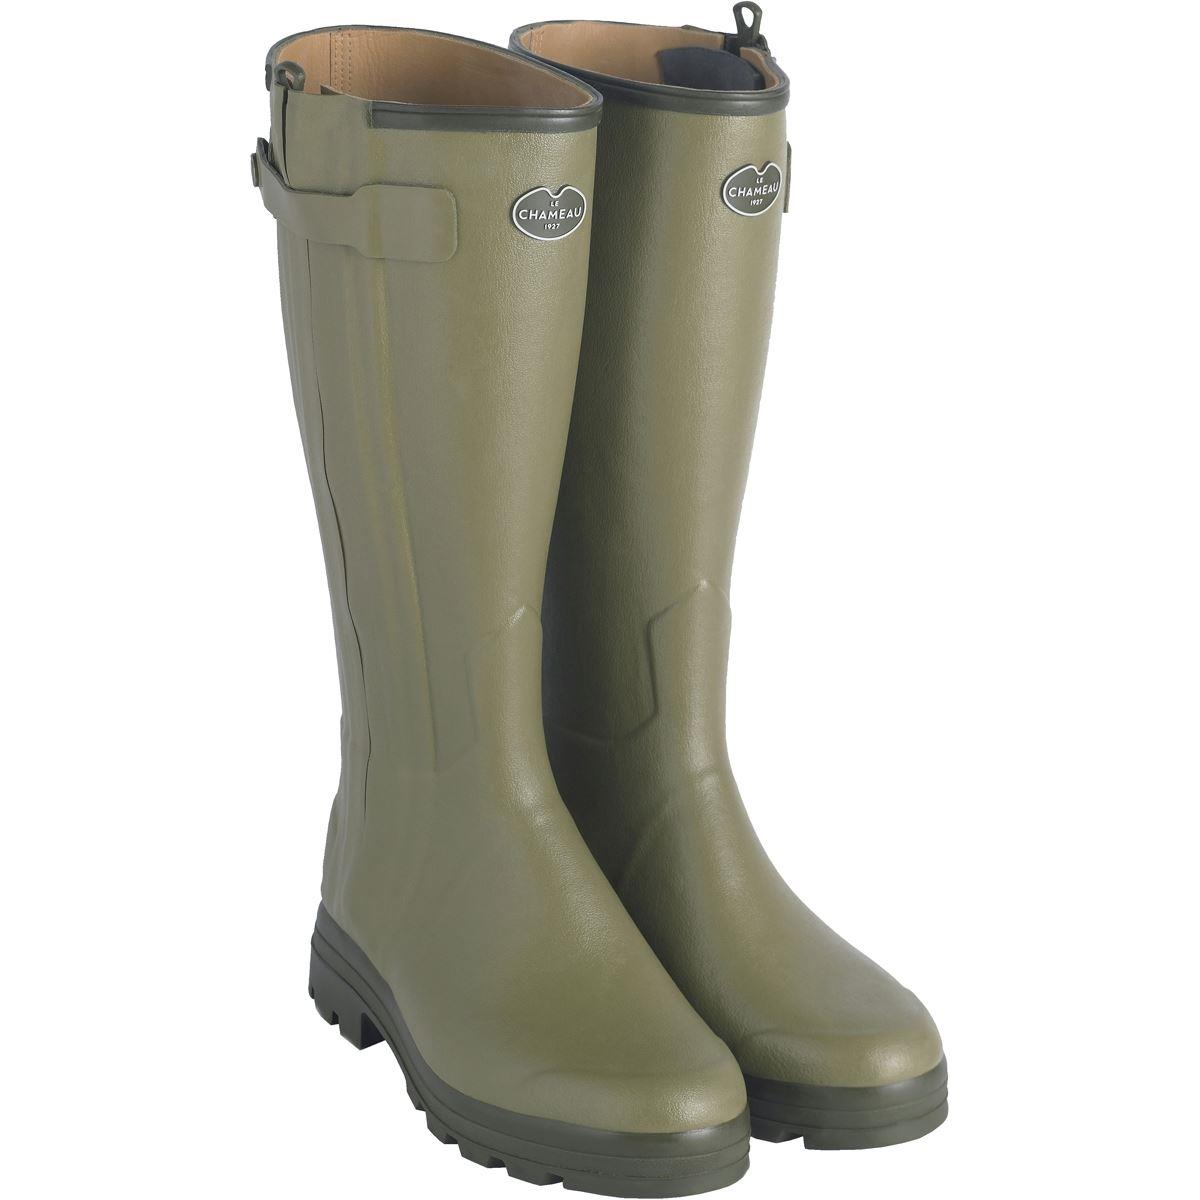 What is the exact calf width for a size 9 Le Chameau Chasseur Wellington Boot?